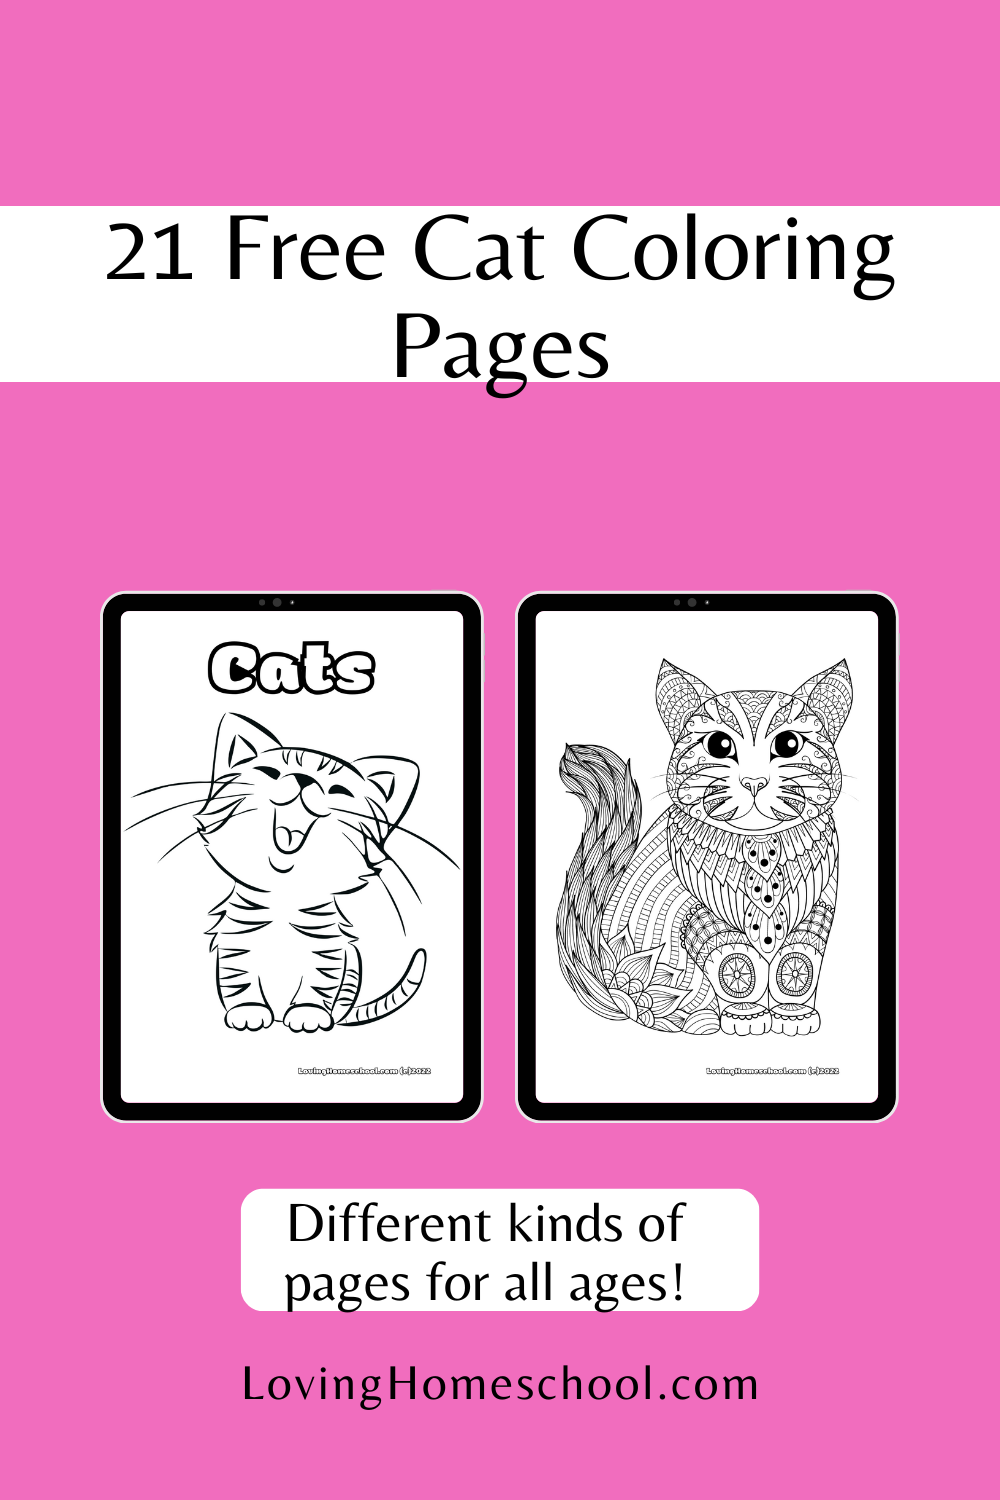 21 Free Cat Coloring Pages Pinterest Pin